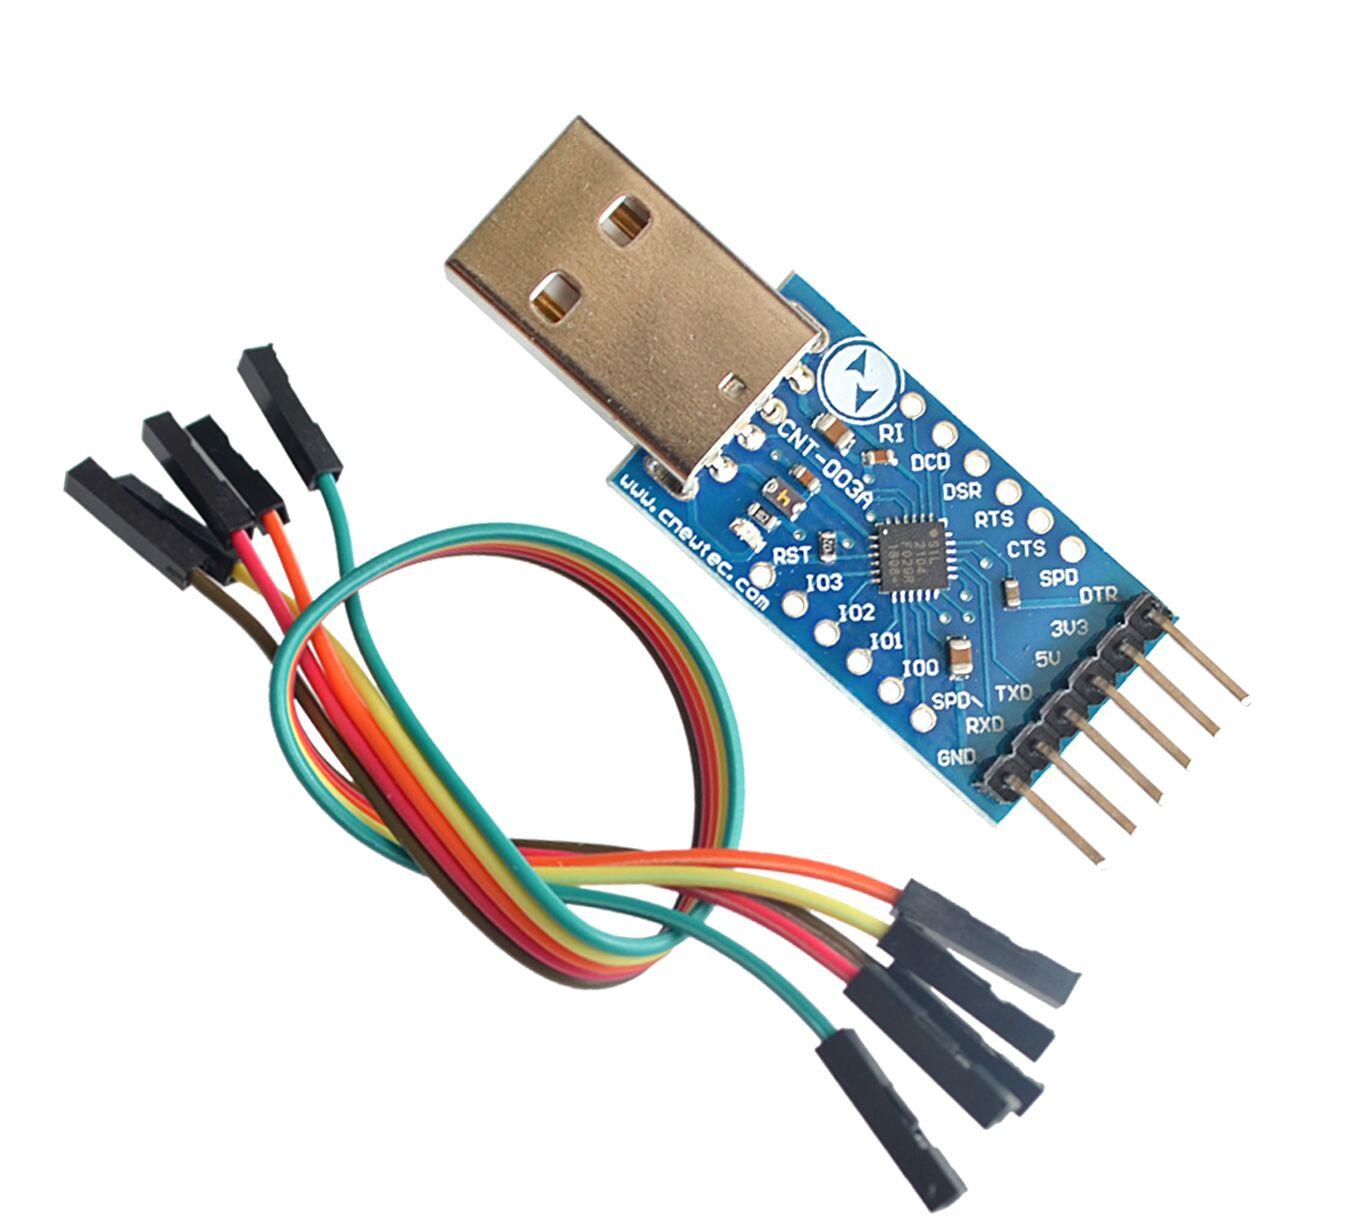 USB 2.0 to TTL UART 6PIN Module Serial Converter CP2104 STC PRGMR Replace CP2102 With Dupont Cables